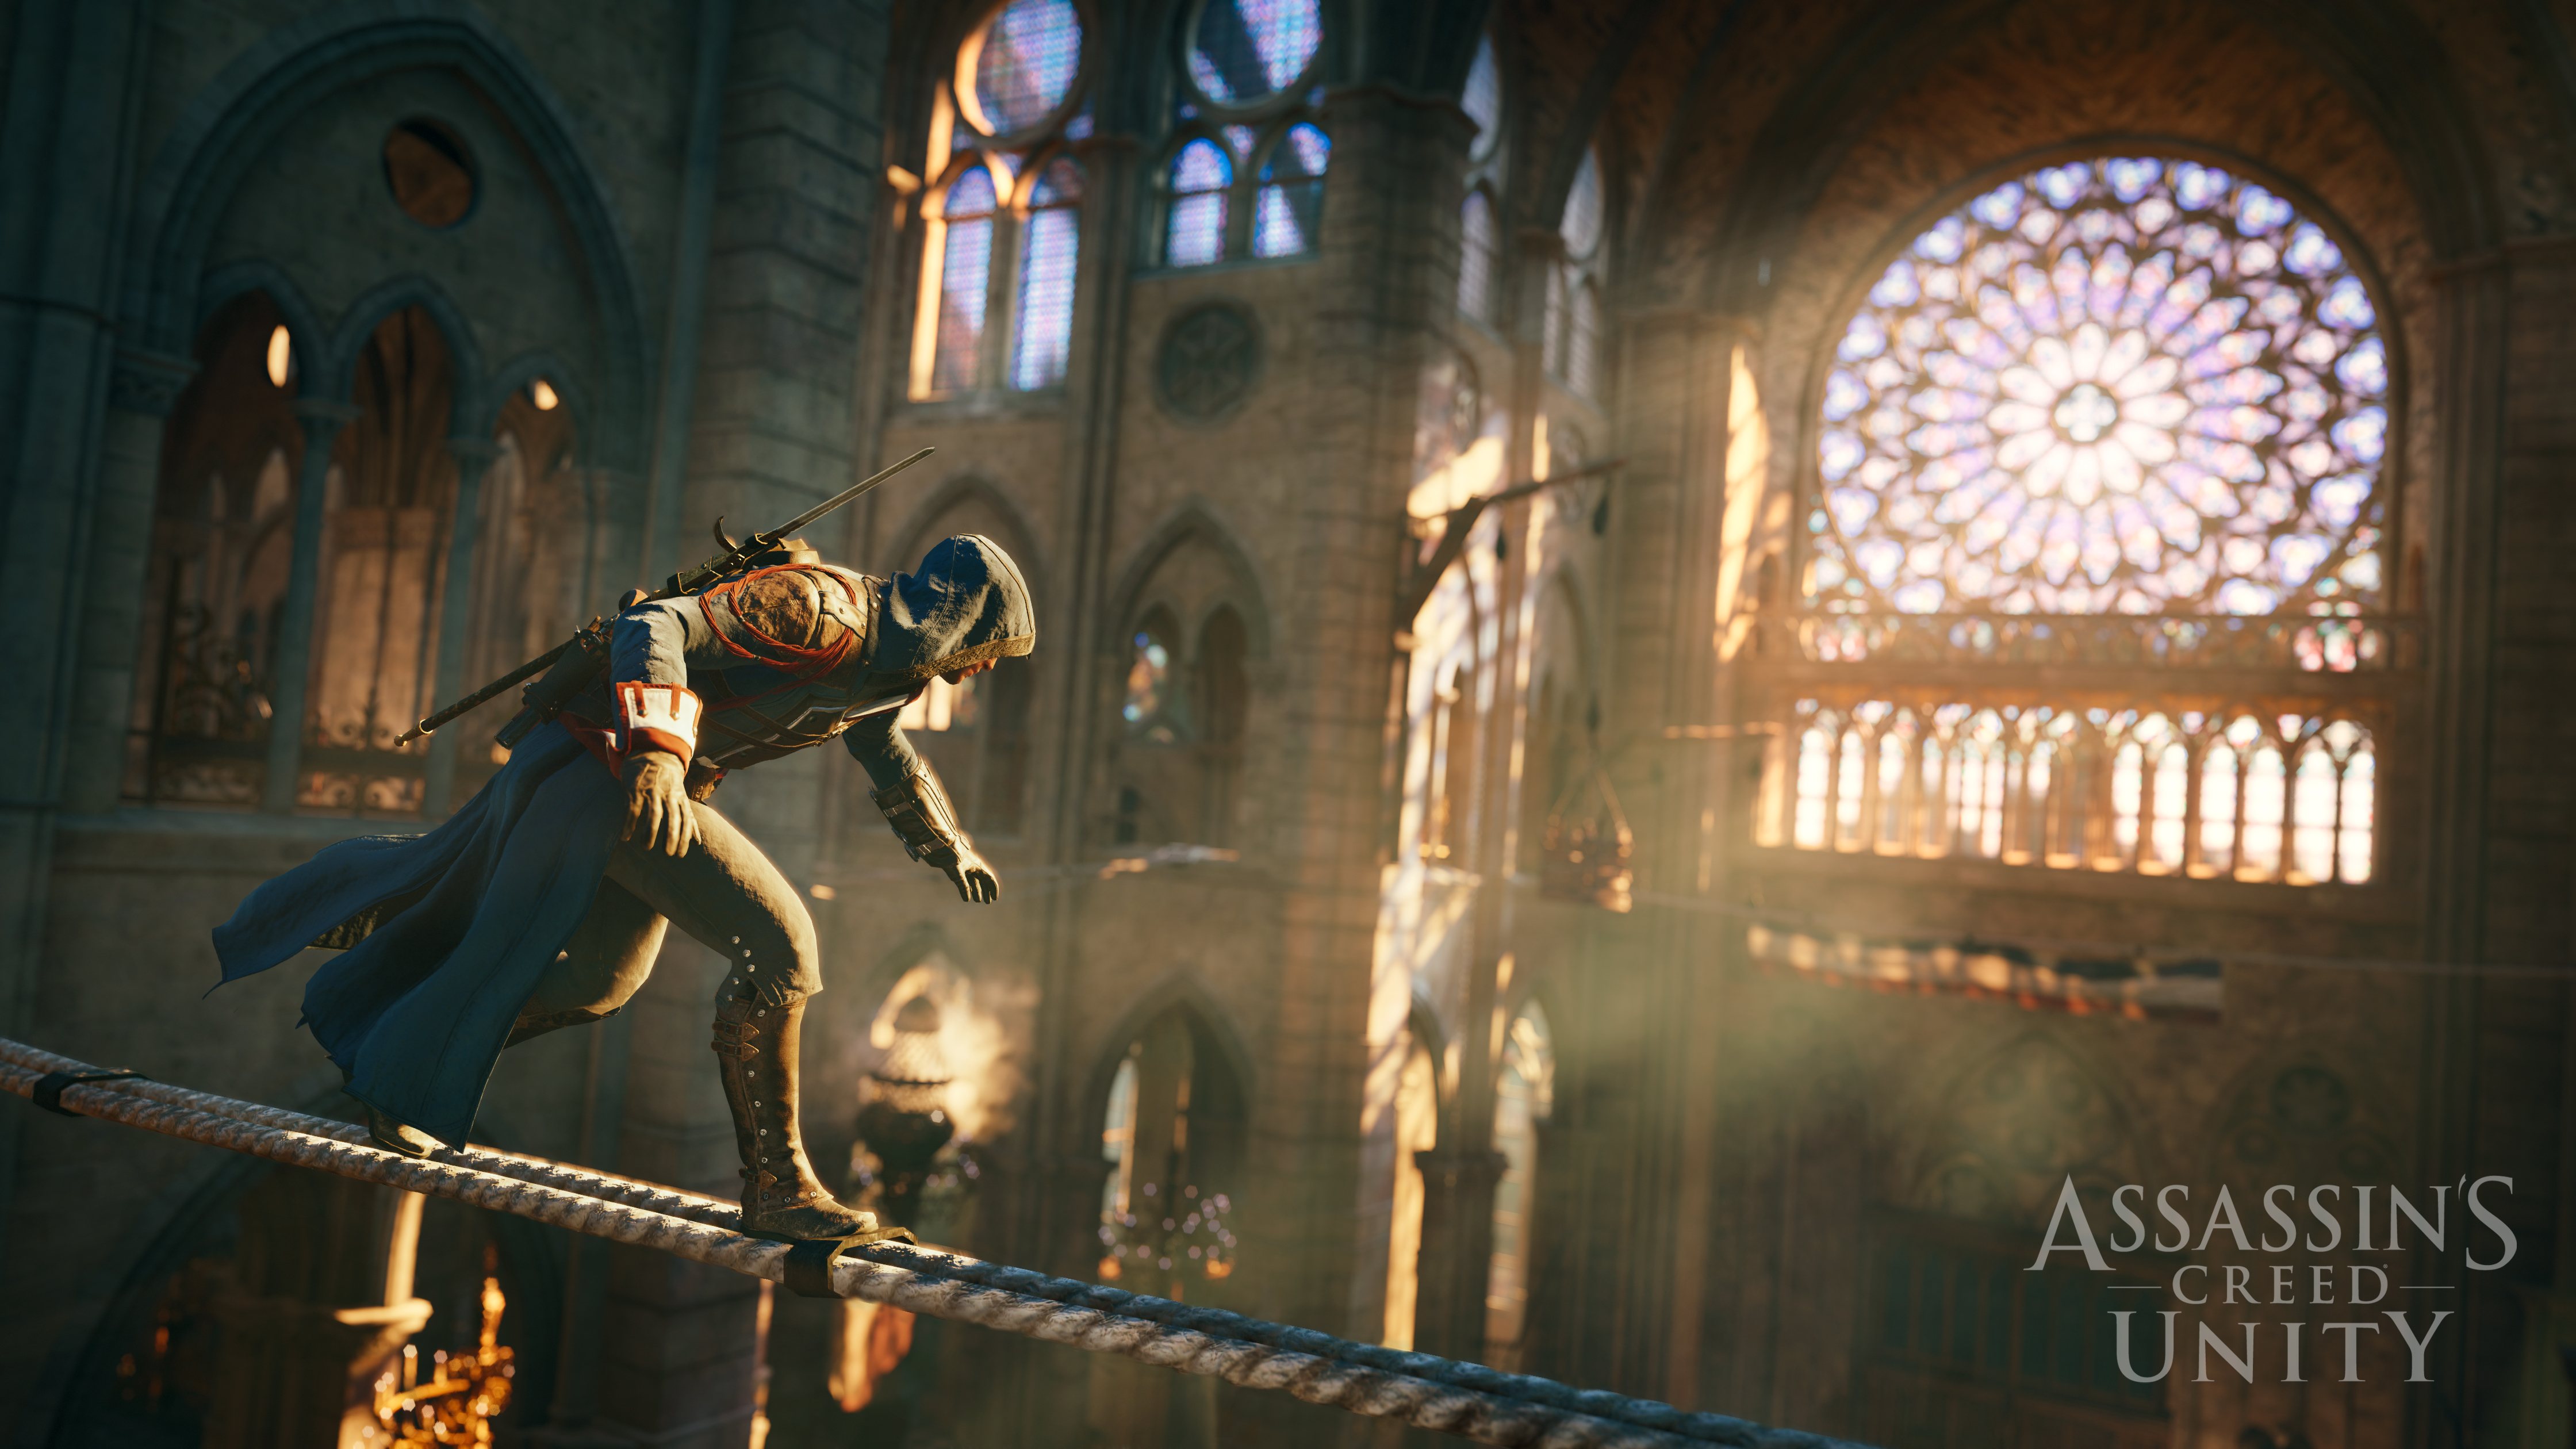 Assassins Creed Unity HD Wallpaper And iPhone Plus